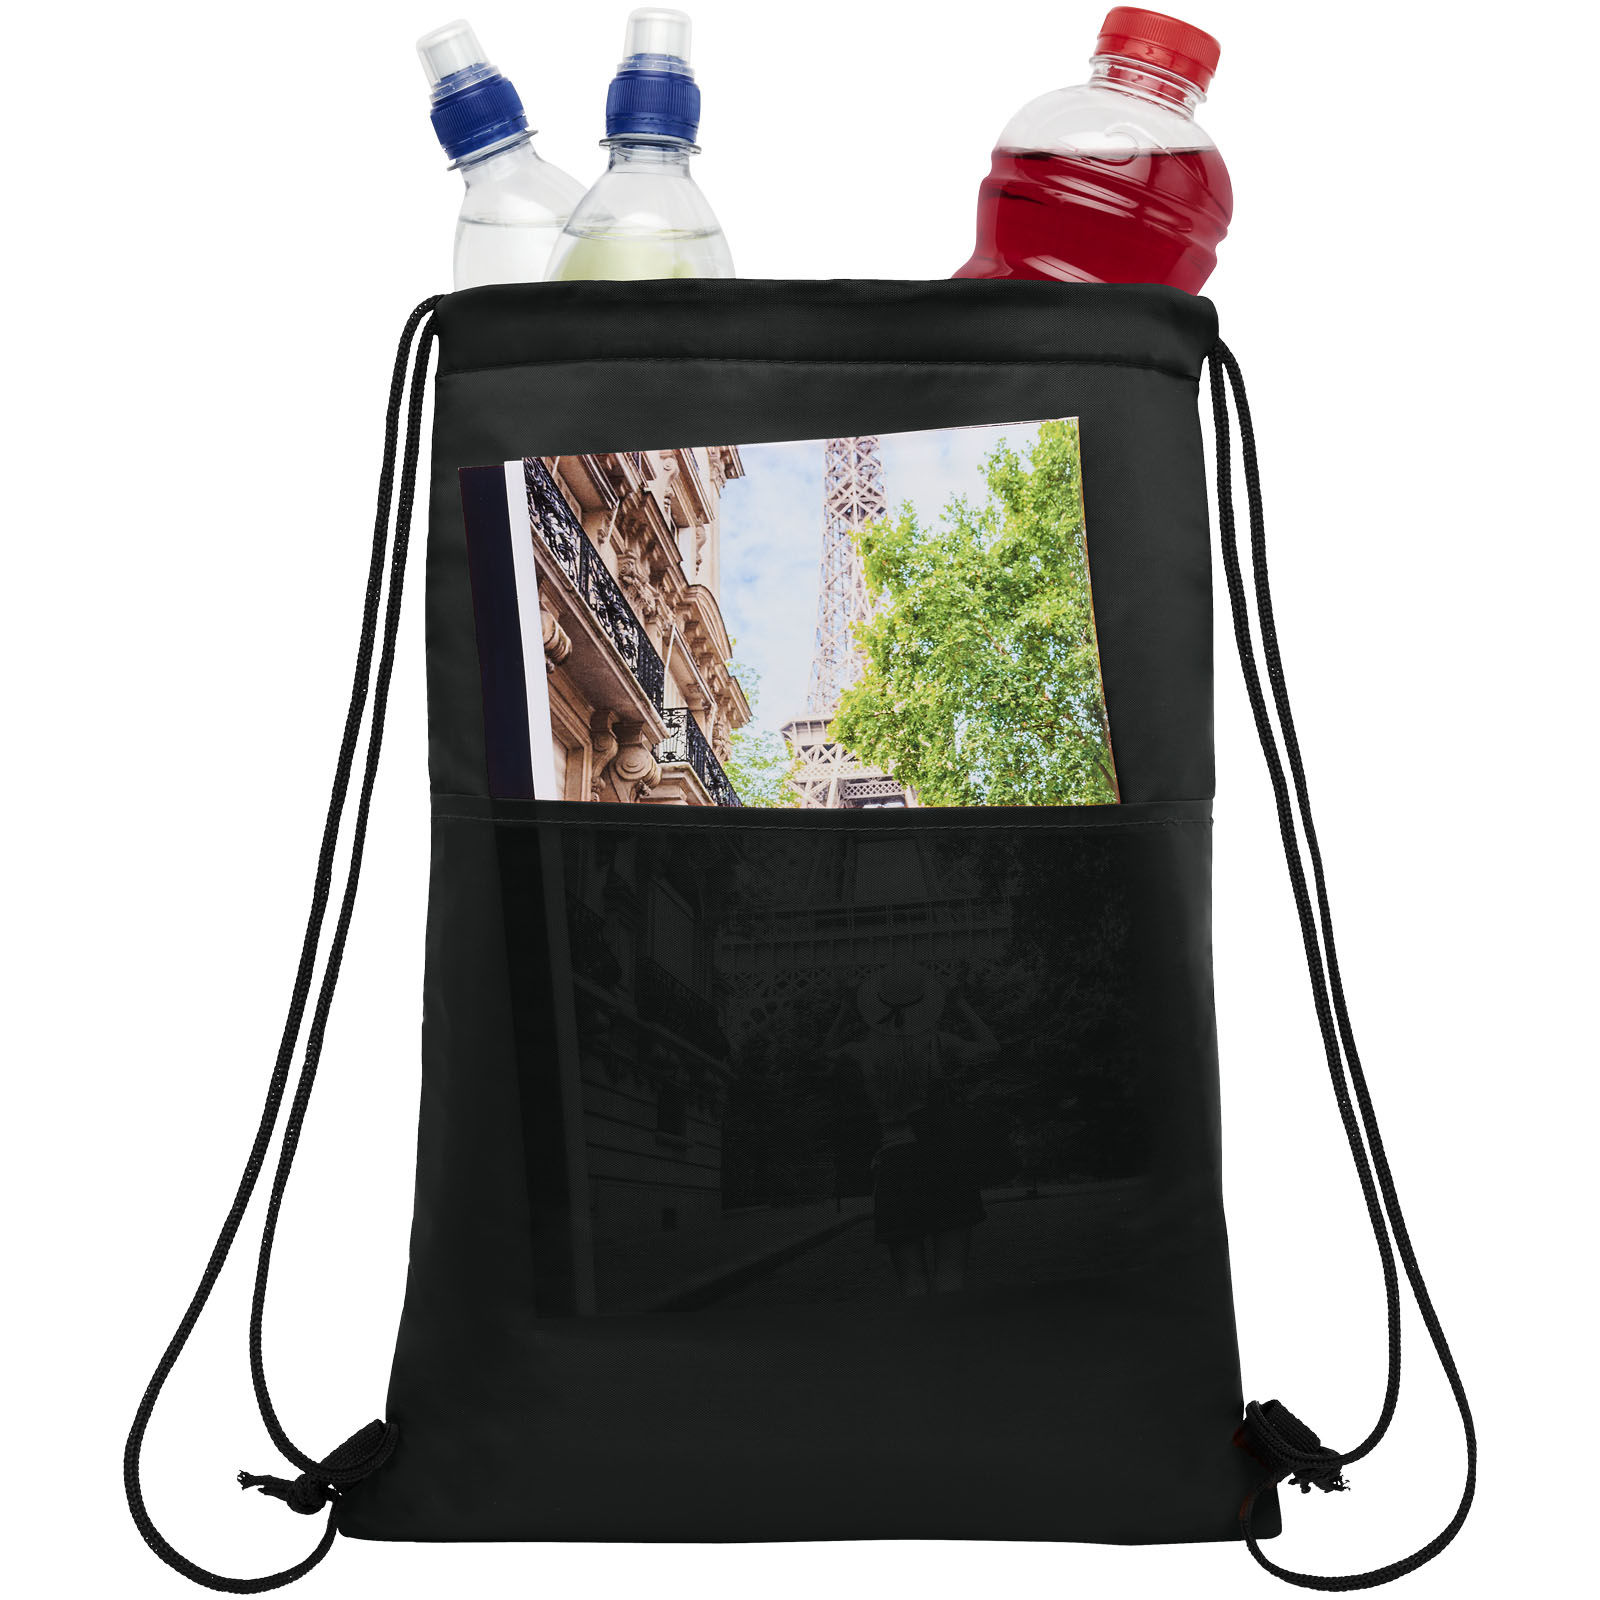 Advertising Cooler bags - Oriole 12-can drawstring cooler bag 5L - 3